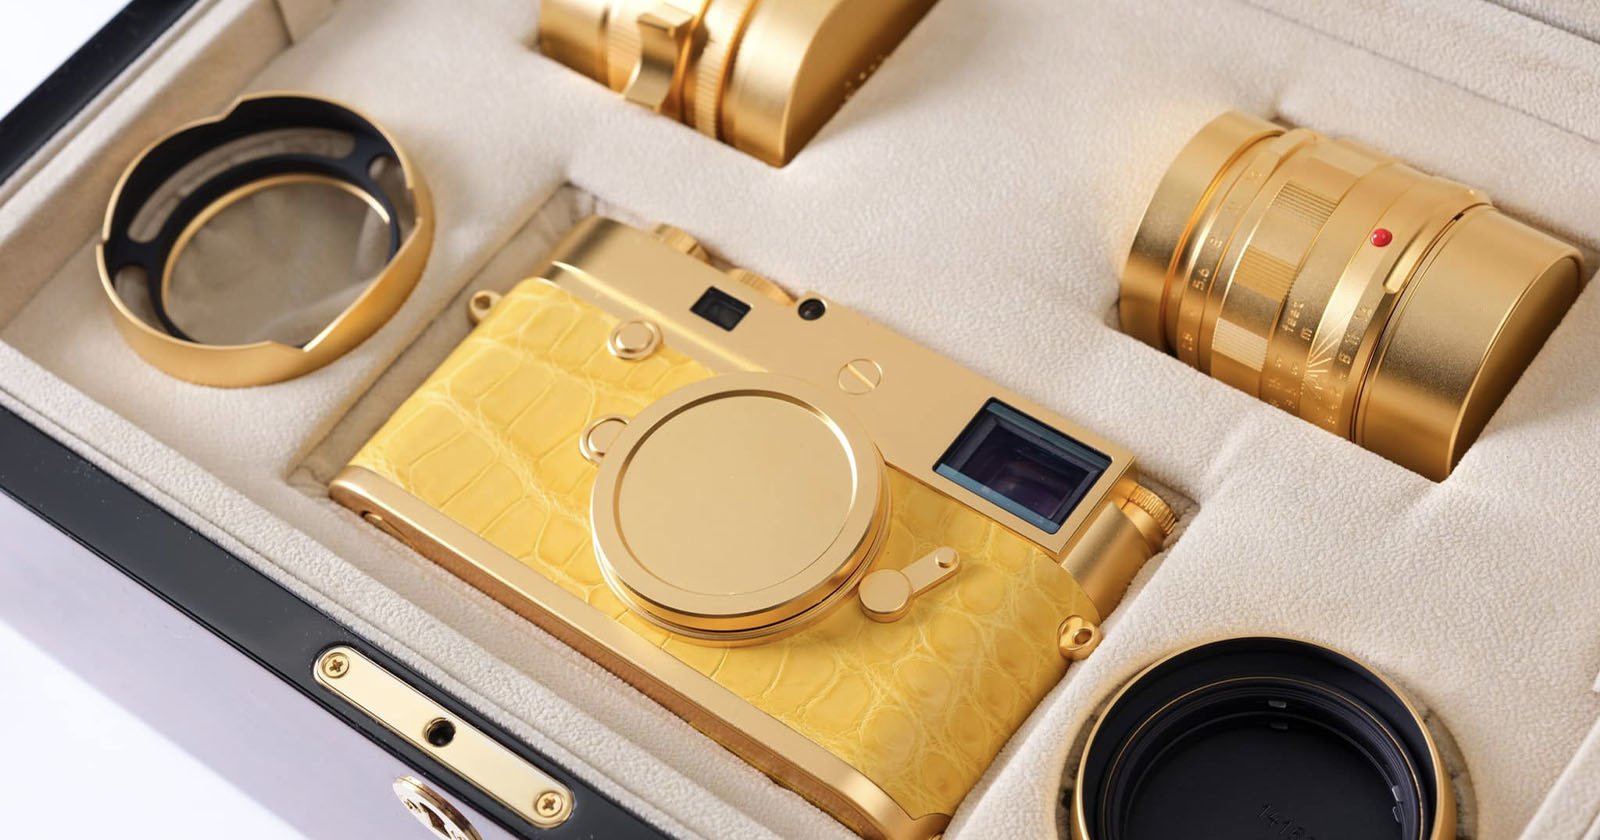  limited edition gold leica being released honor 